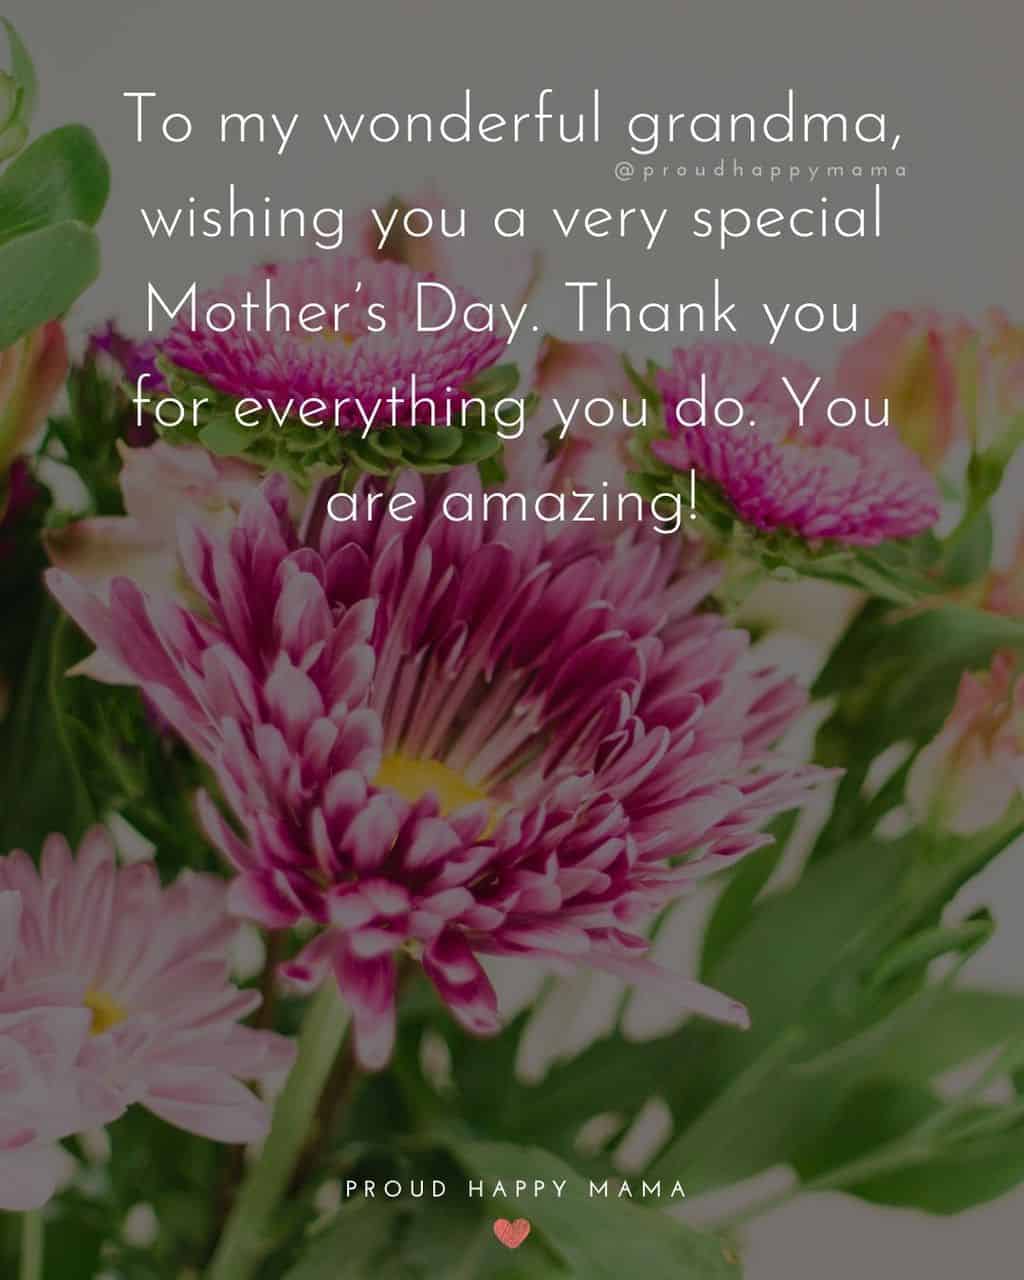 Happy Mothers Day Quotes To Grandma - To my wonderful grandma, wishing you a very special Mother’s Day. Thank you for